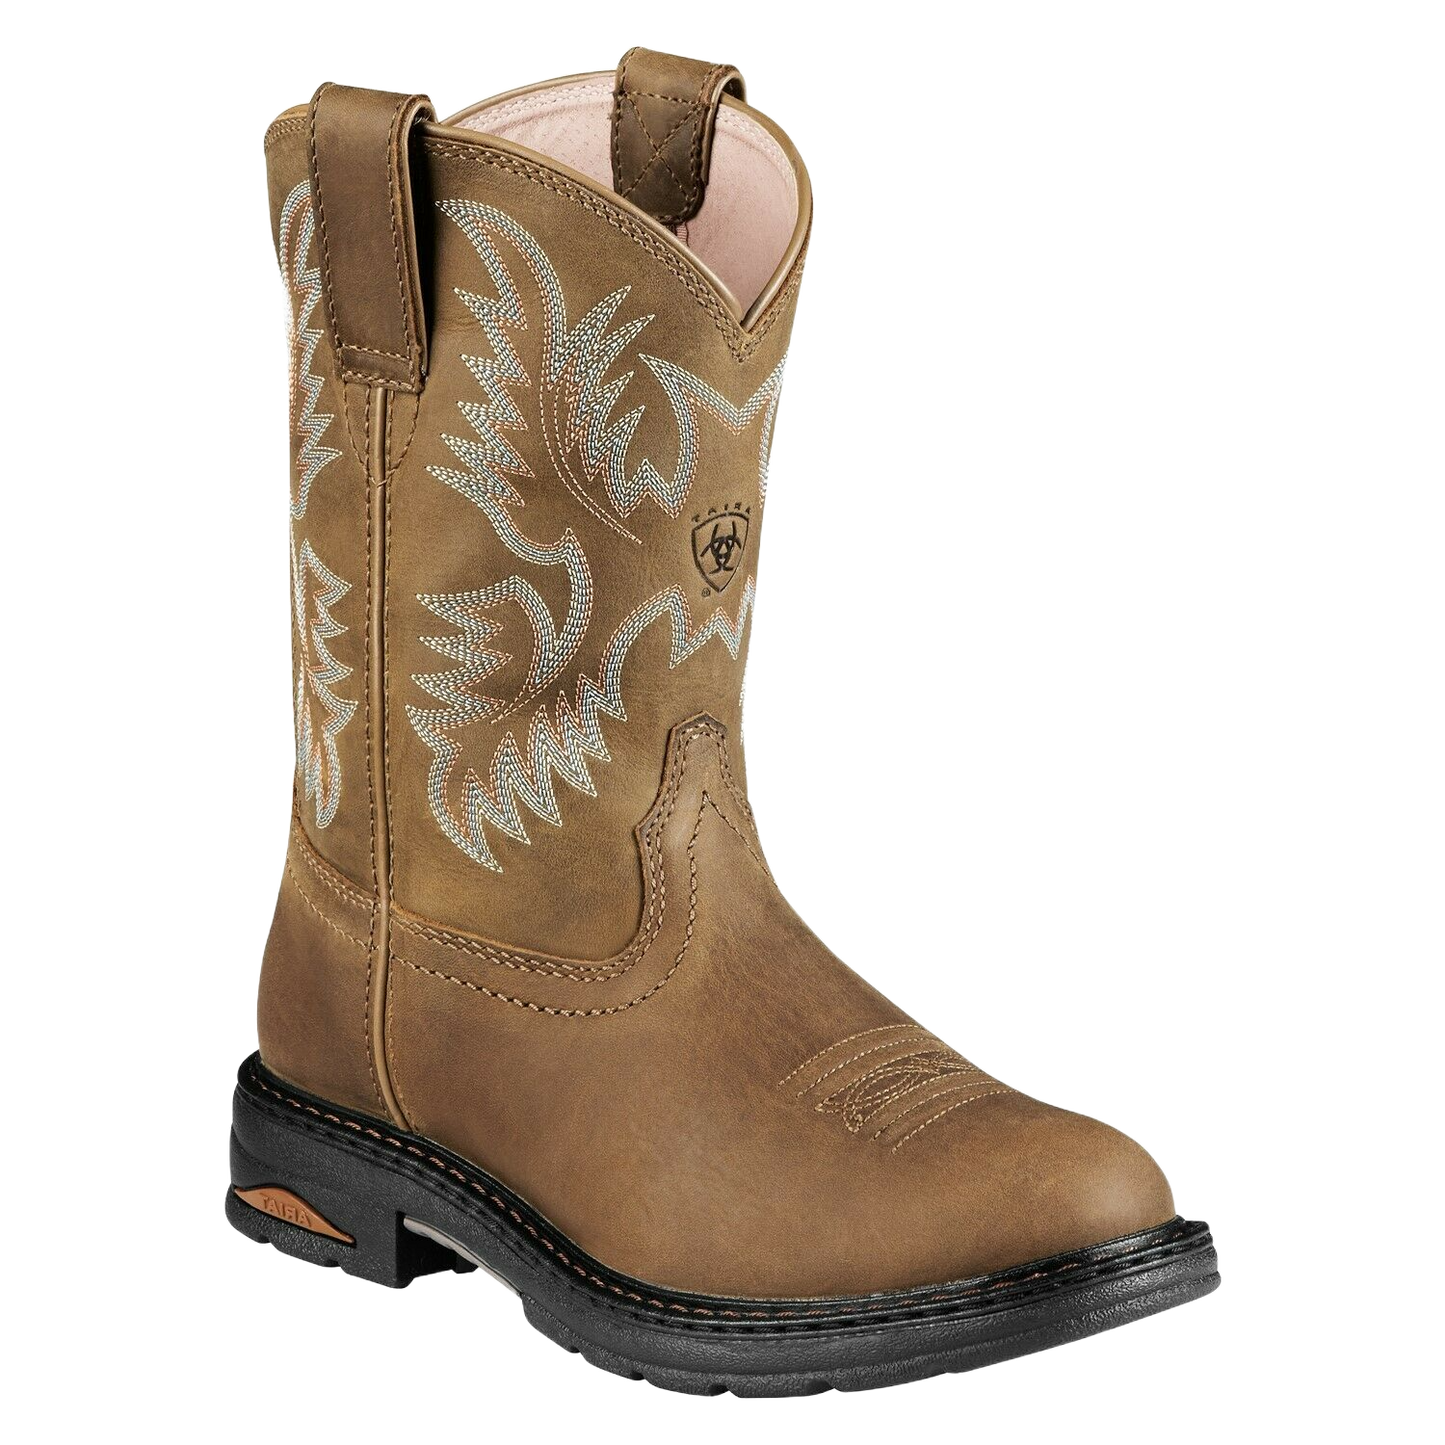 Ariat® Ladies Tracey Composite Toe Dusted Brown Work Boot 10008634